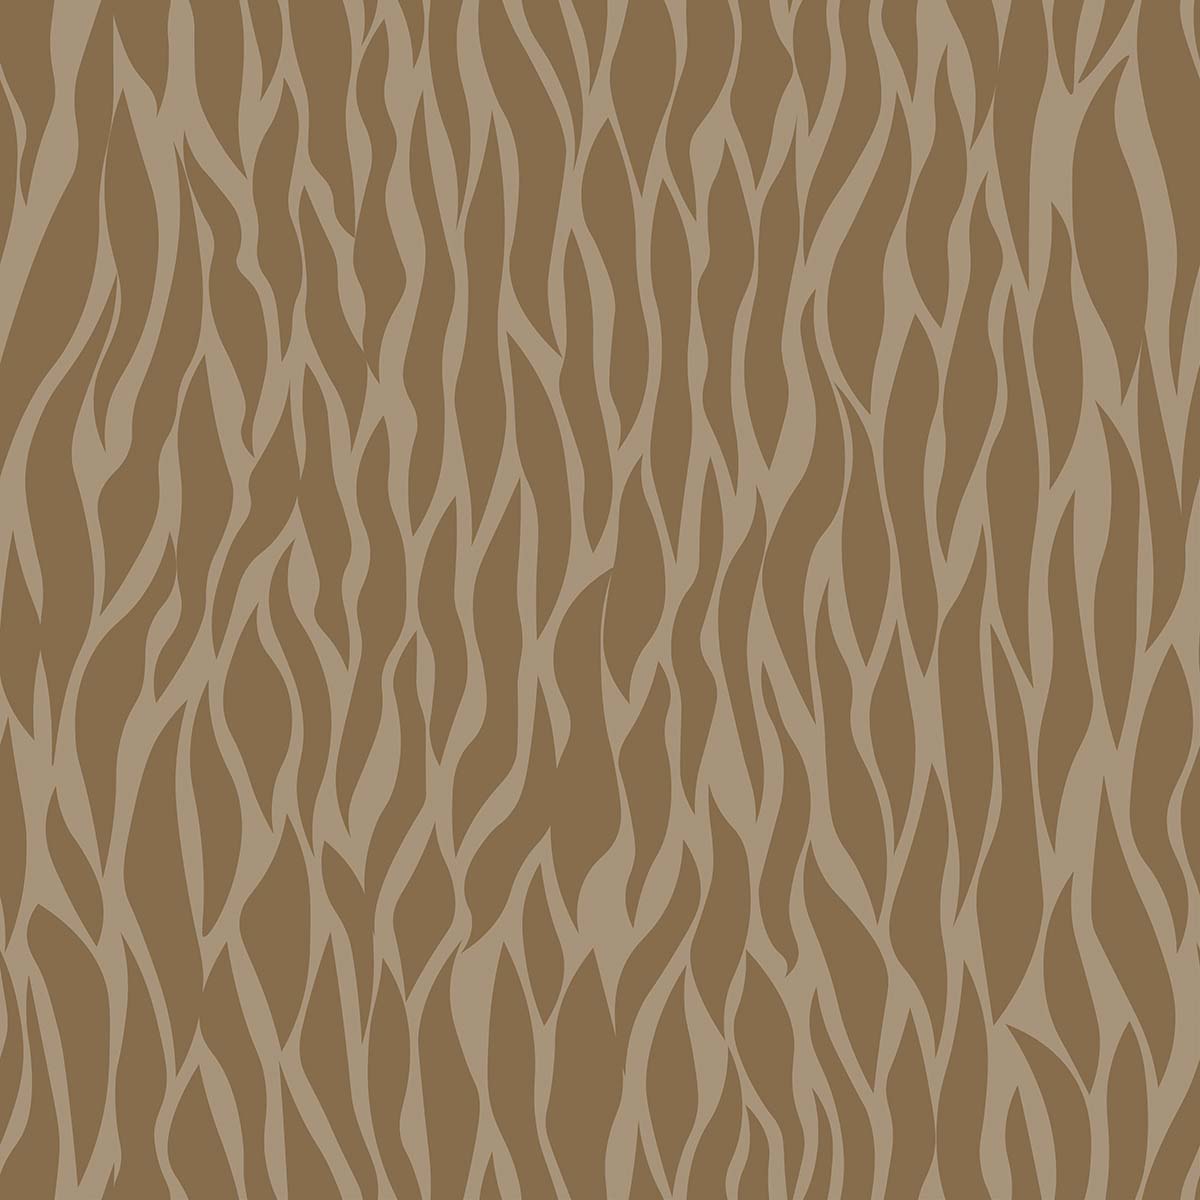 A brown and white pattern